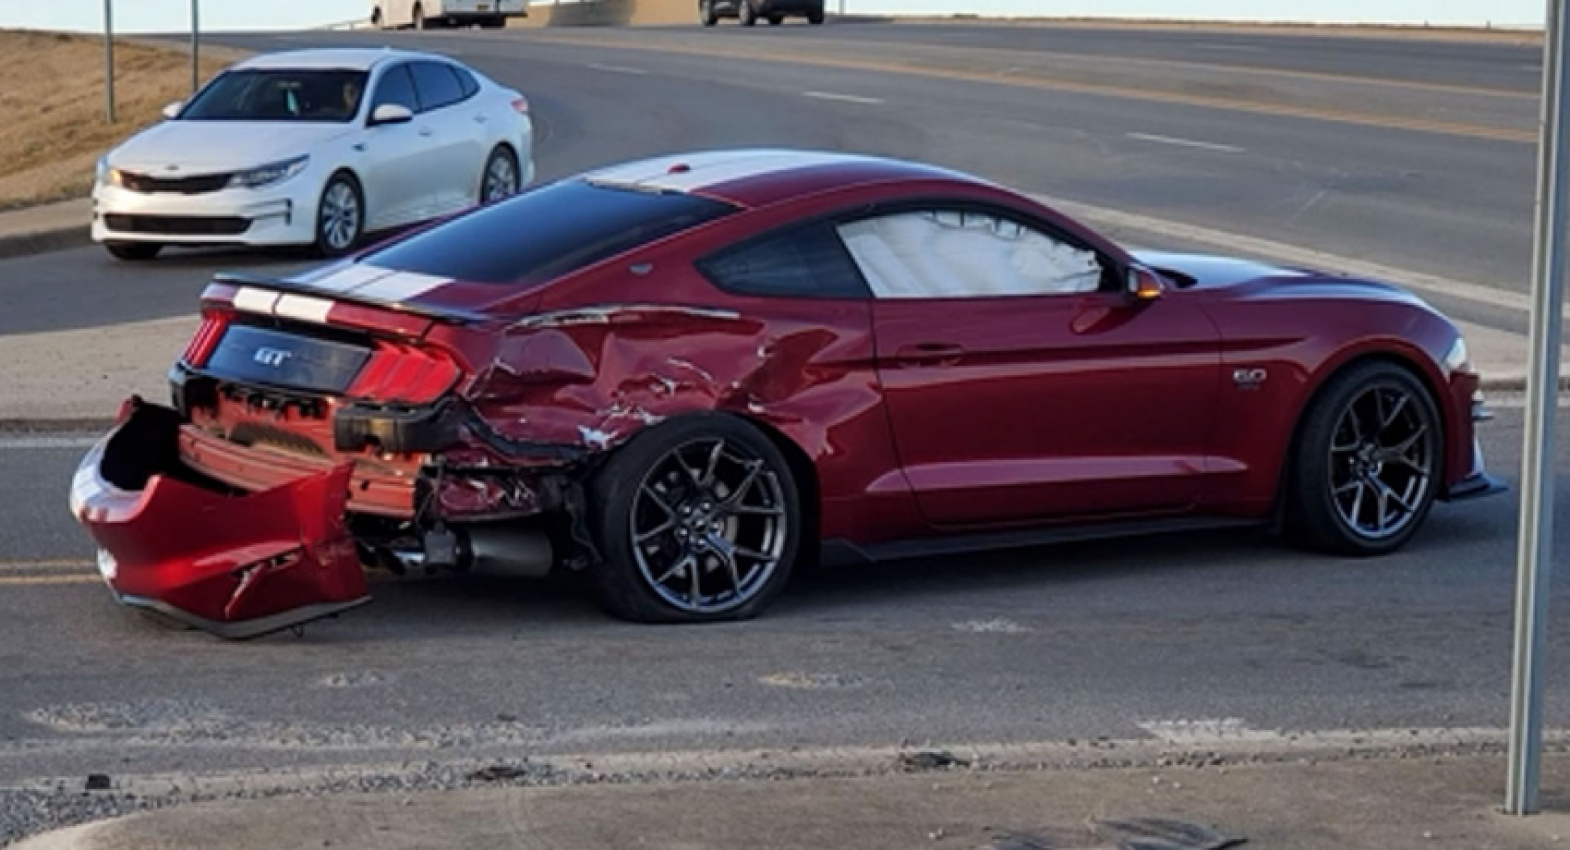 autos, cars, ford, news, accidents, dashcam, ford mustang, ford videos, offbeat news, trucks, video, ford mustang driver cuts off pickup, guess what happens next?